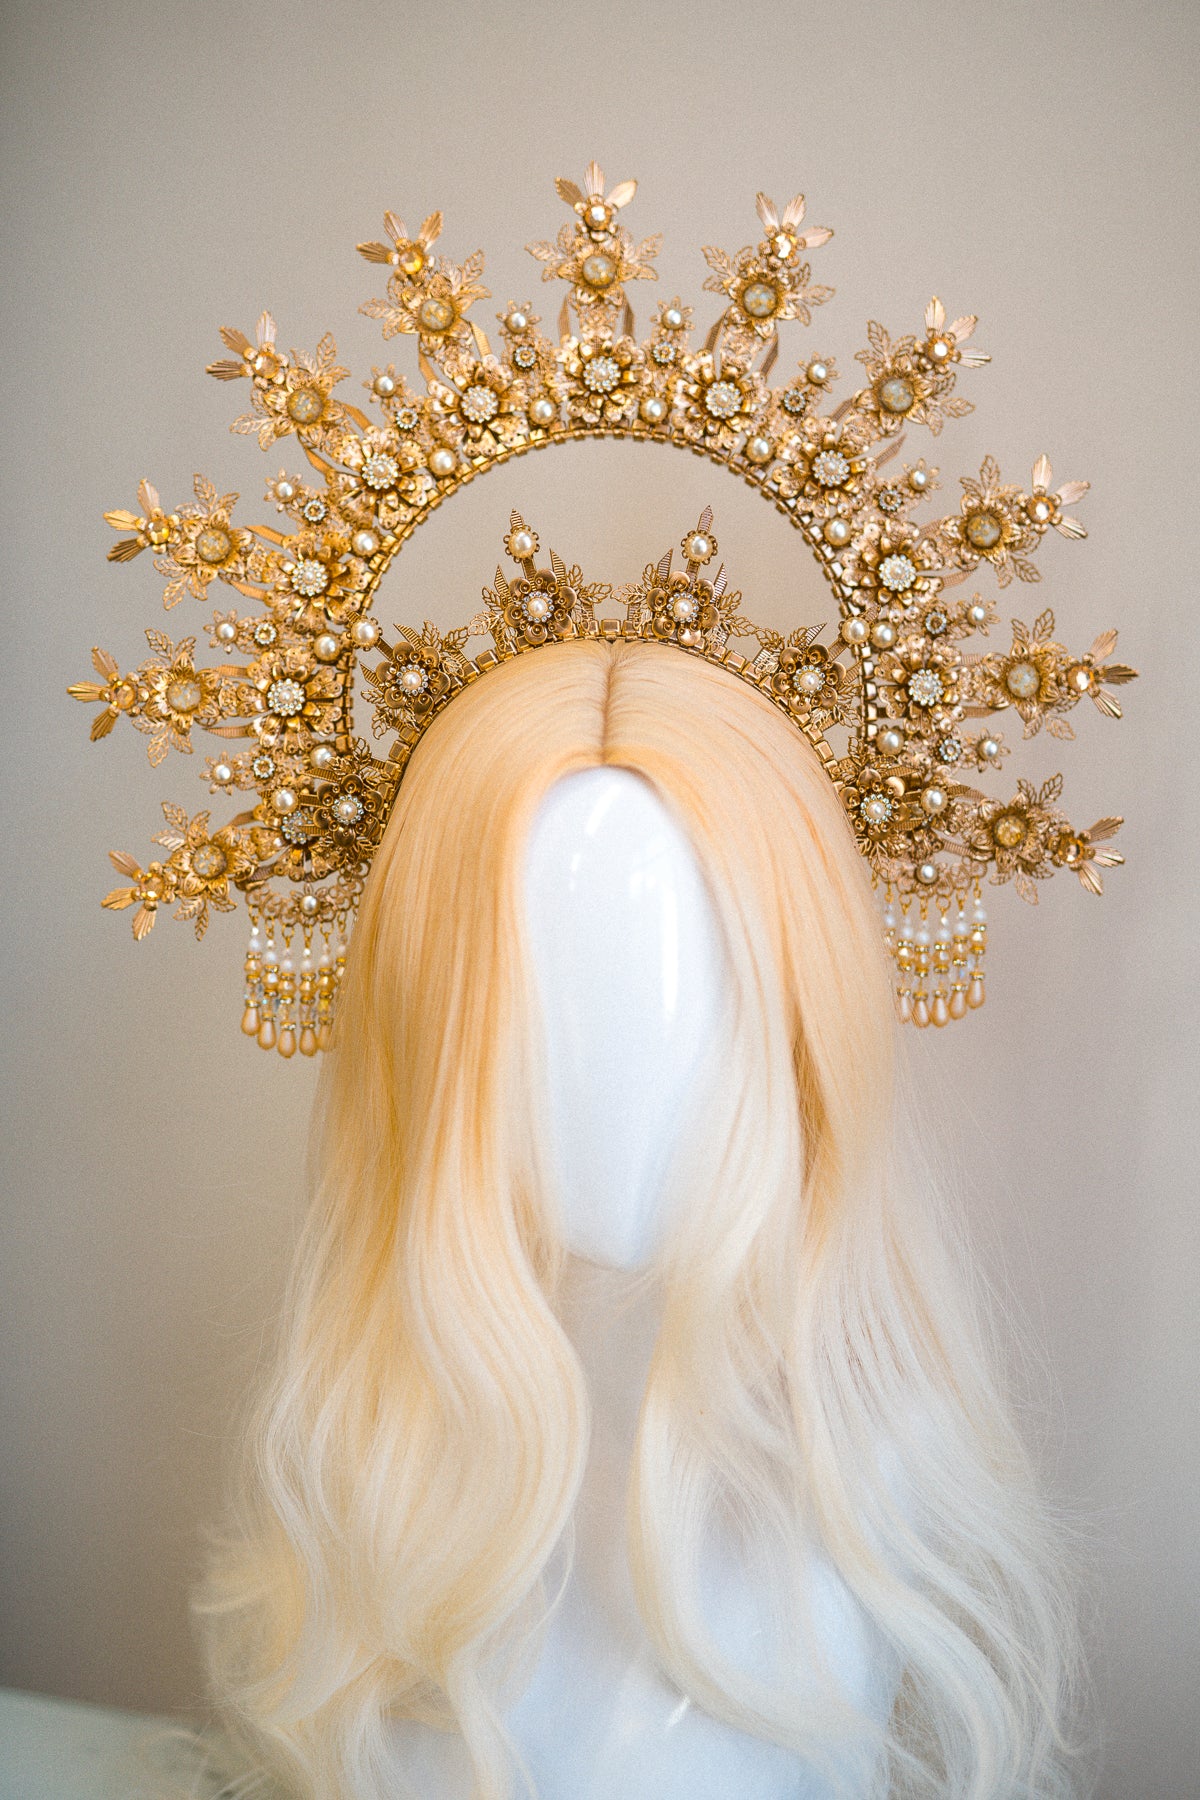 Queen Gold Halo Crown